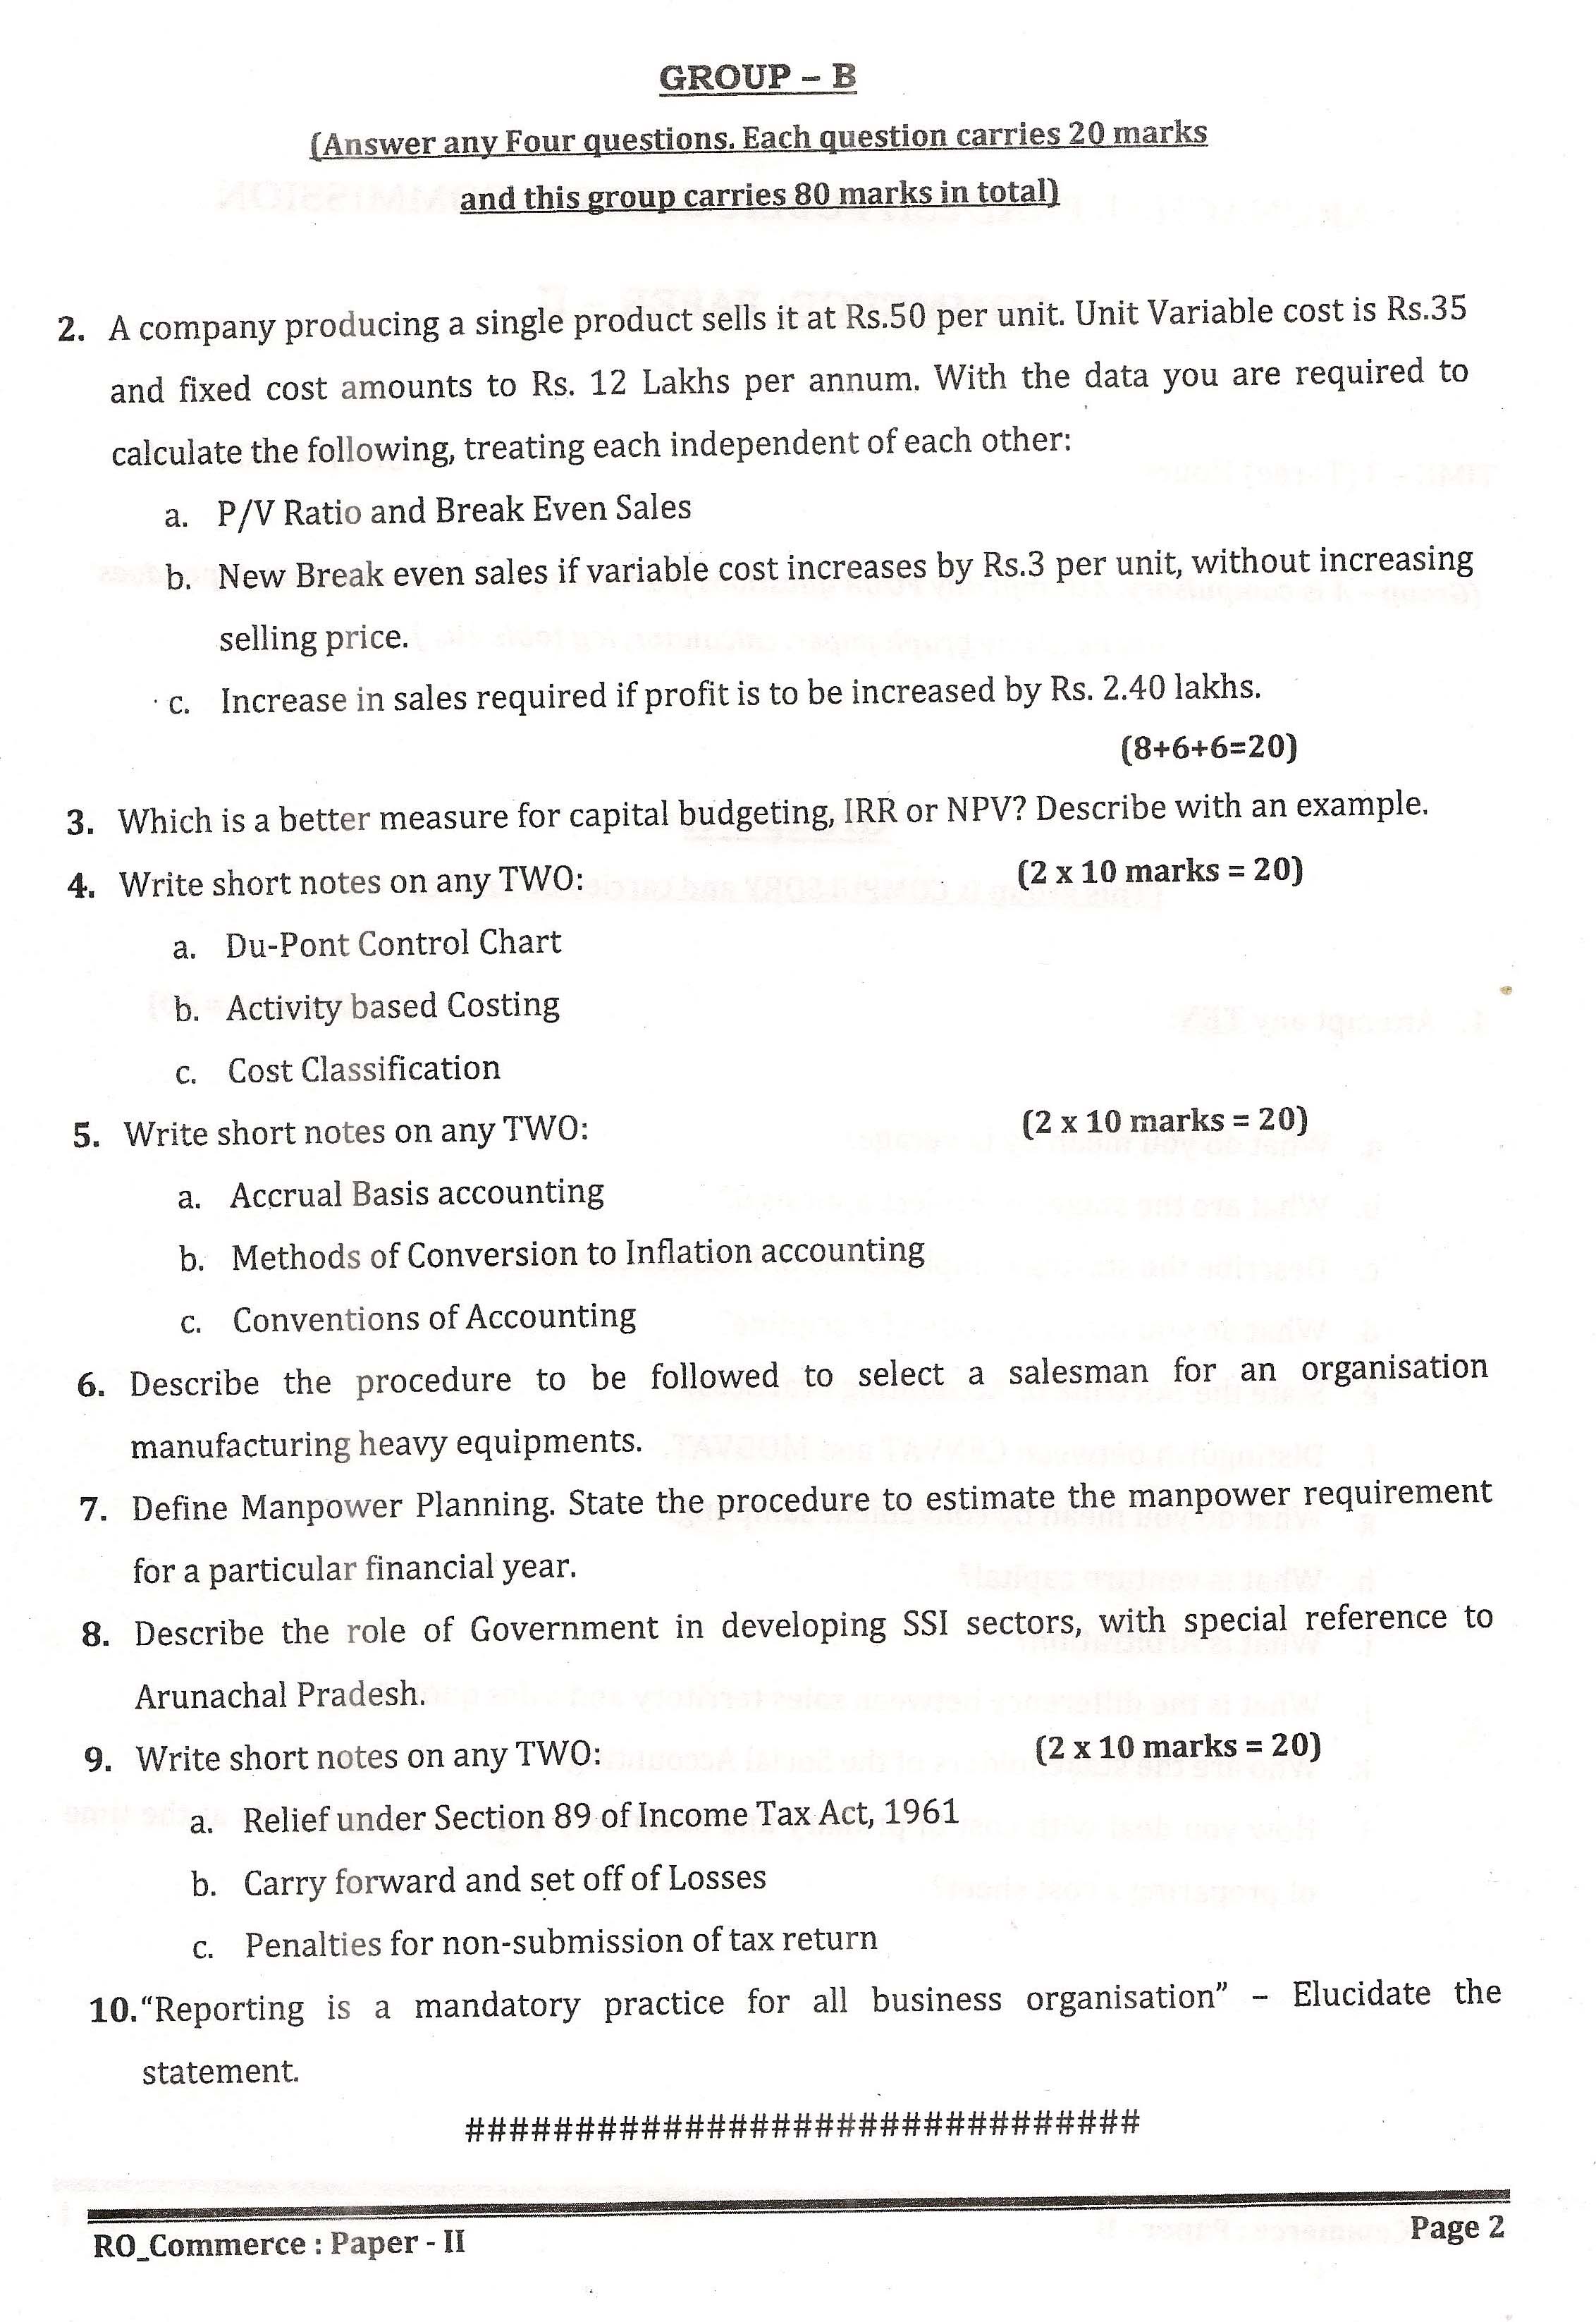 APPSC Research Officer Commerce Paper II Exam Question Paper 2014 2